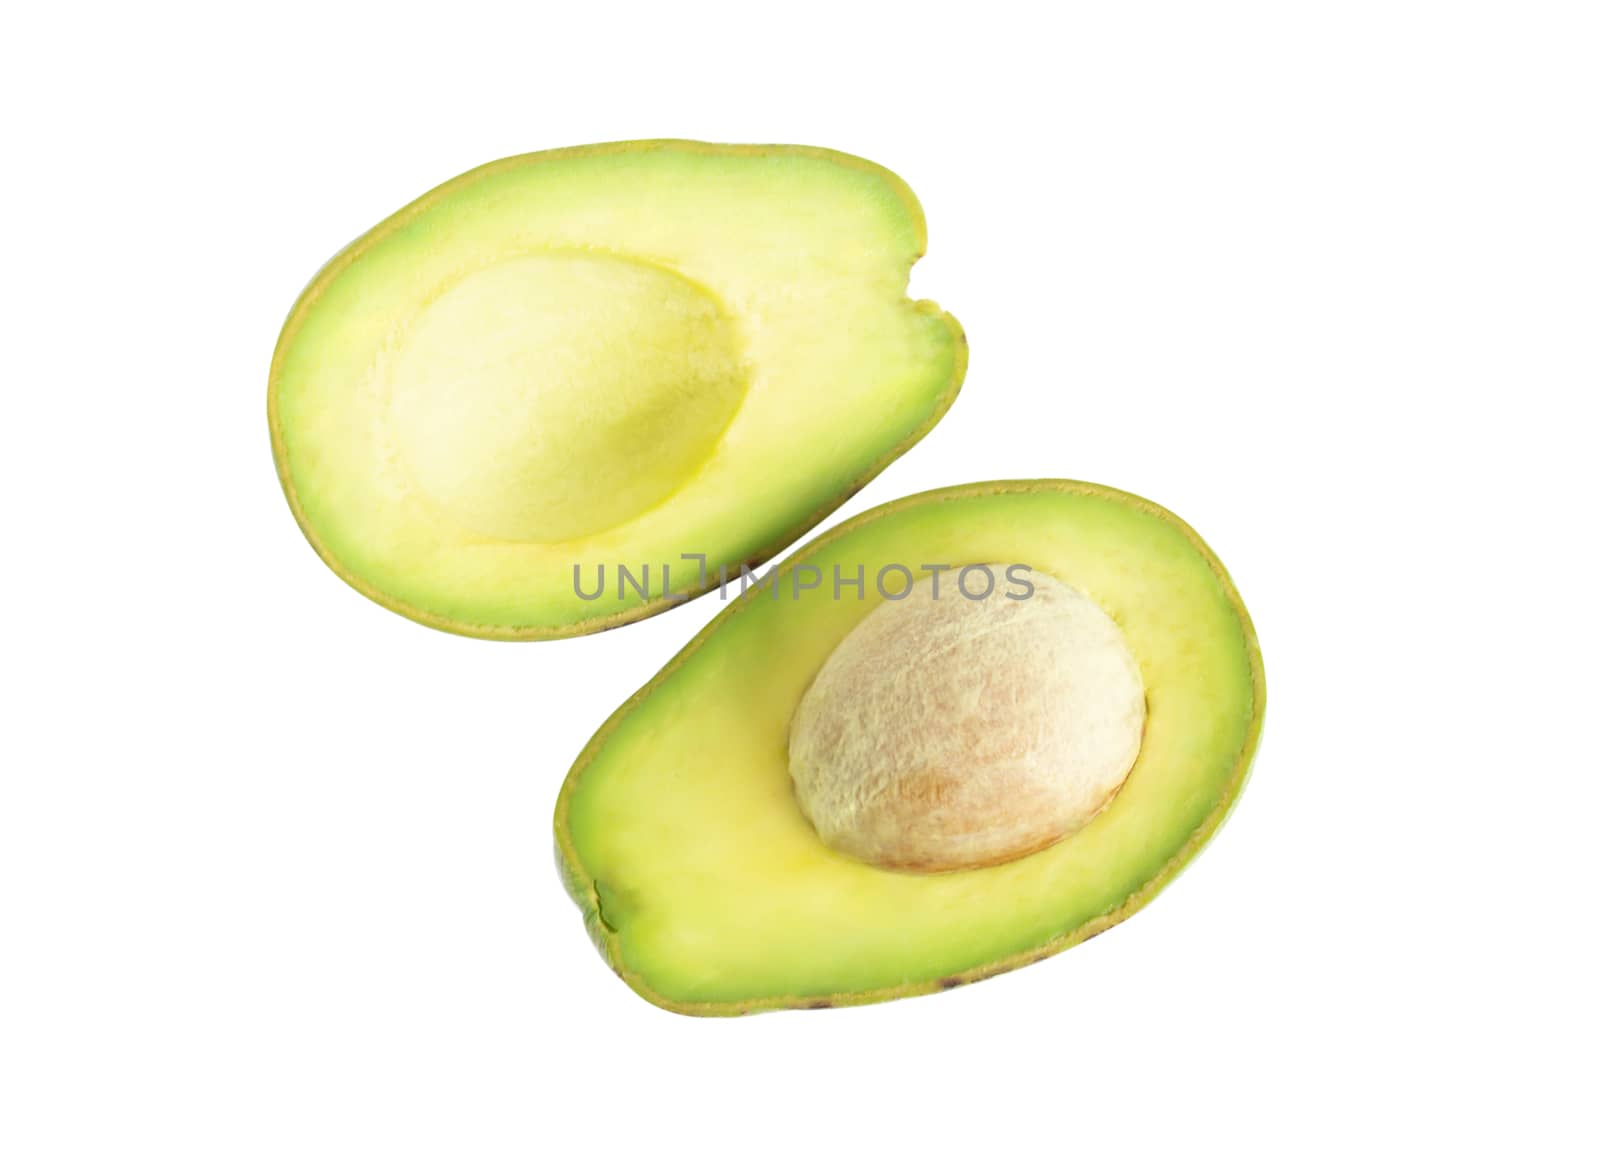 Closeup avocado ripe fruit isolated on white background with copy space, healthy food concept